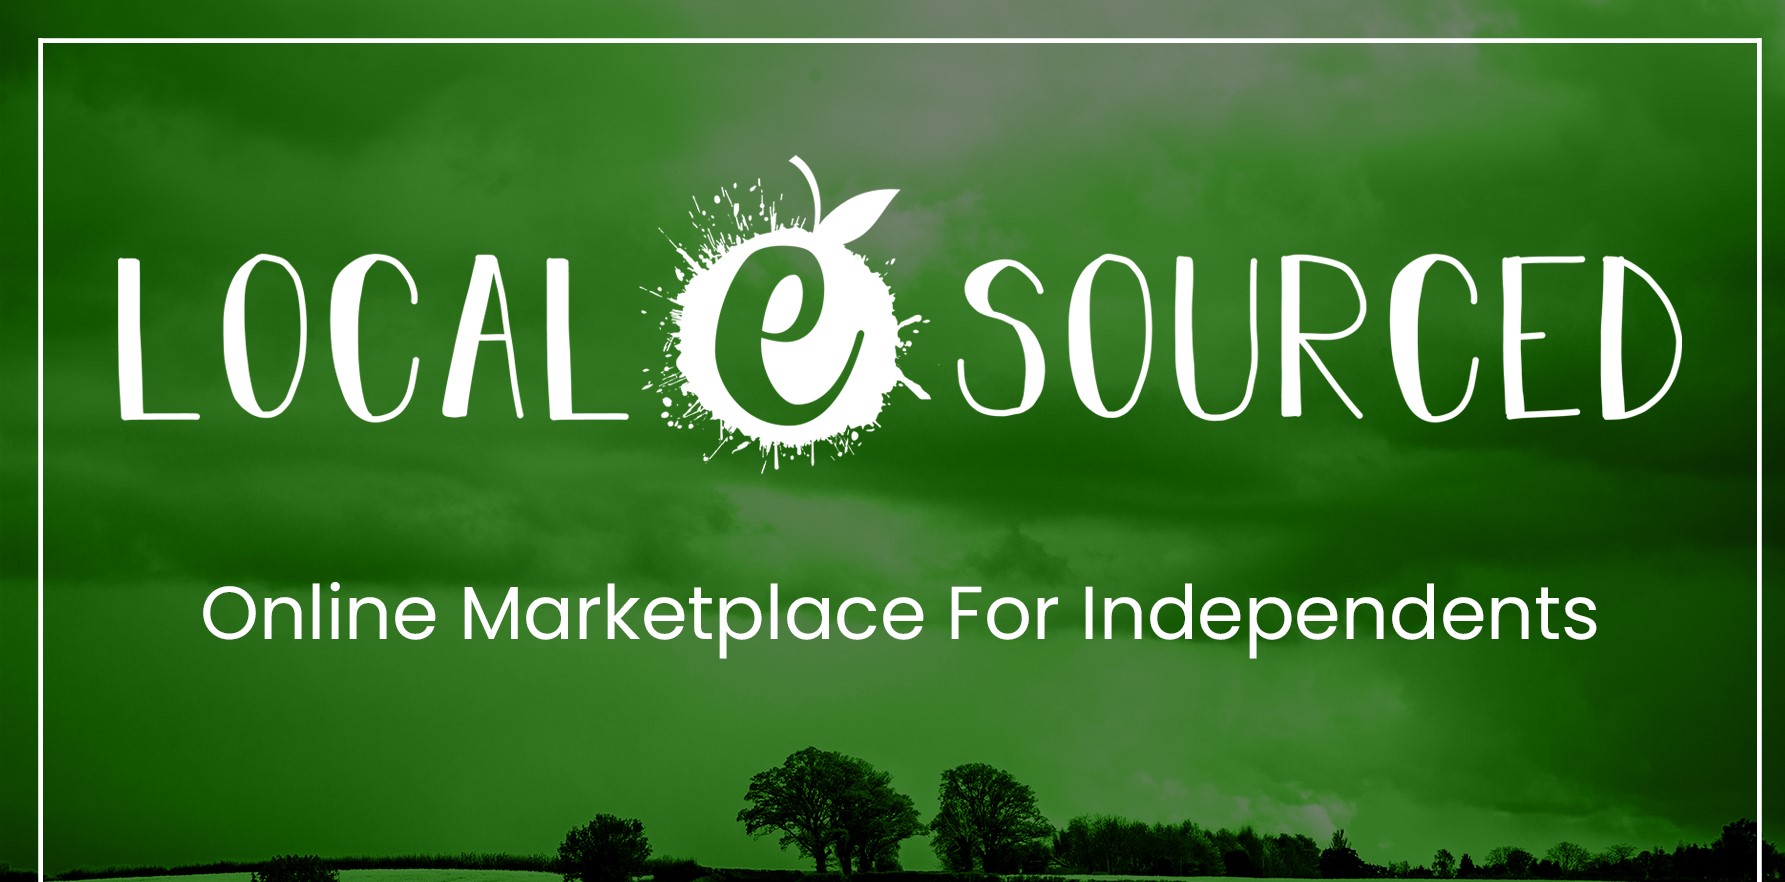 FEATURED | Local e Sourced Shortlisted for the Farm Shop & Deli Awards 2021